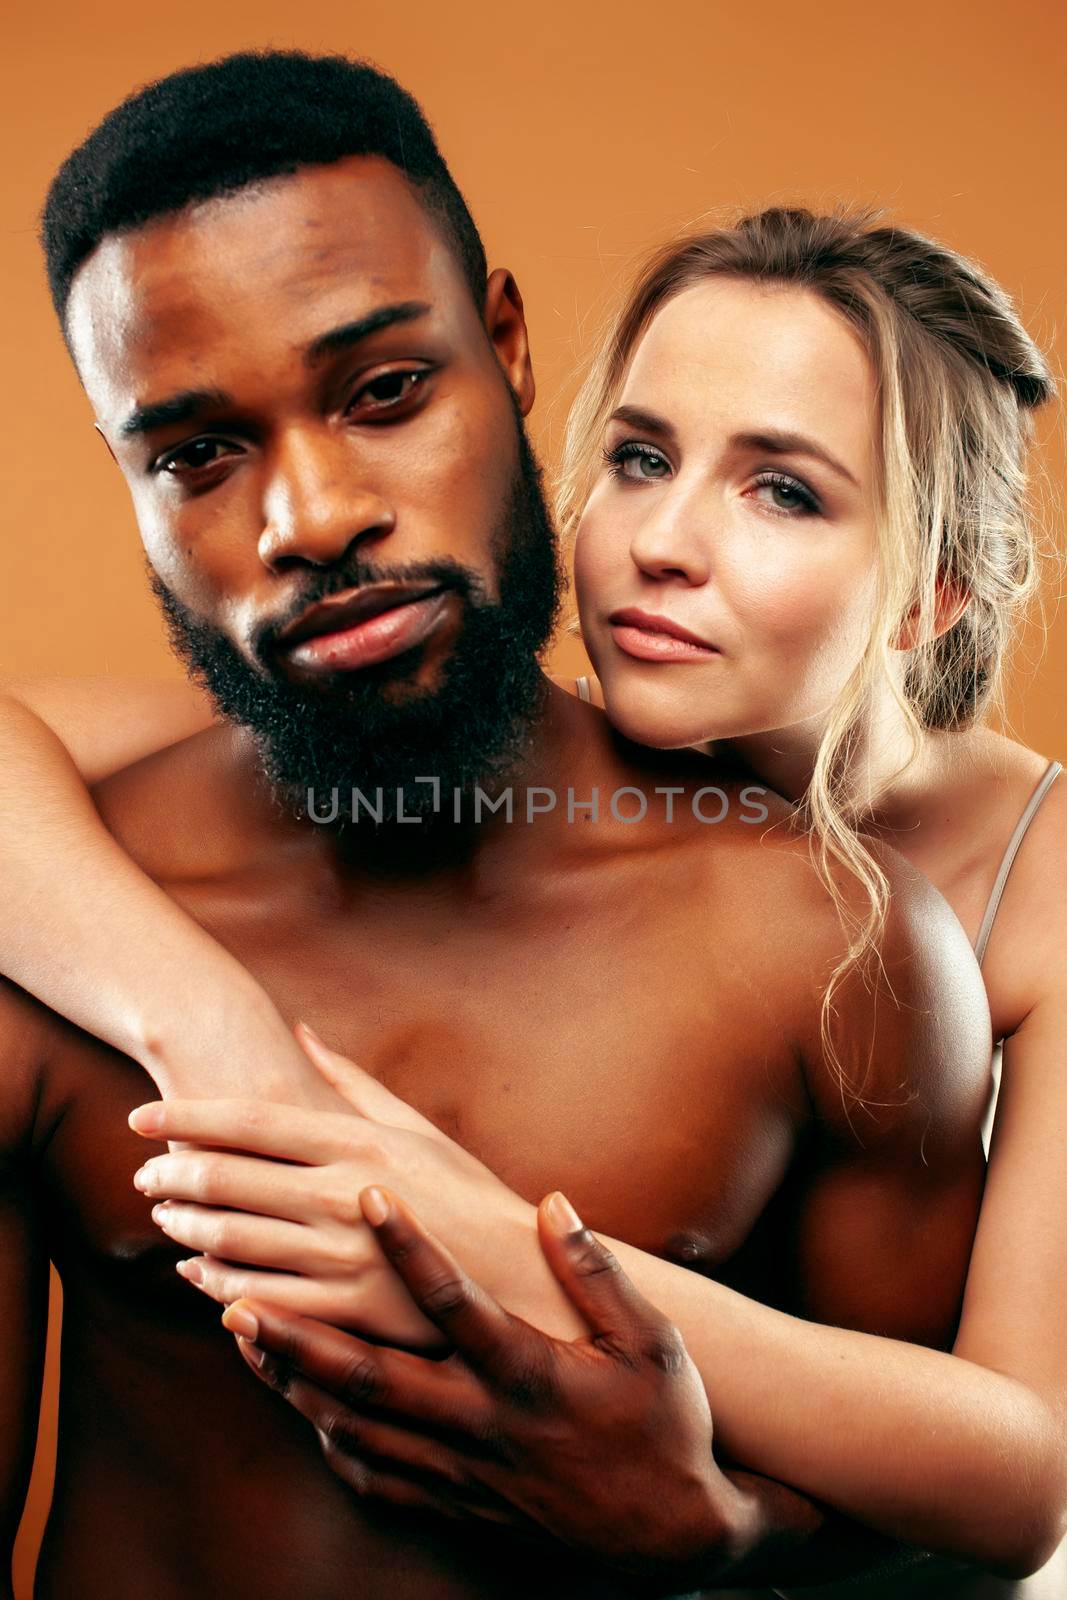 Young pretty couple diverse races together posing sensitive on brown background, lifestyle people concept by JordanJ